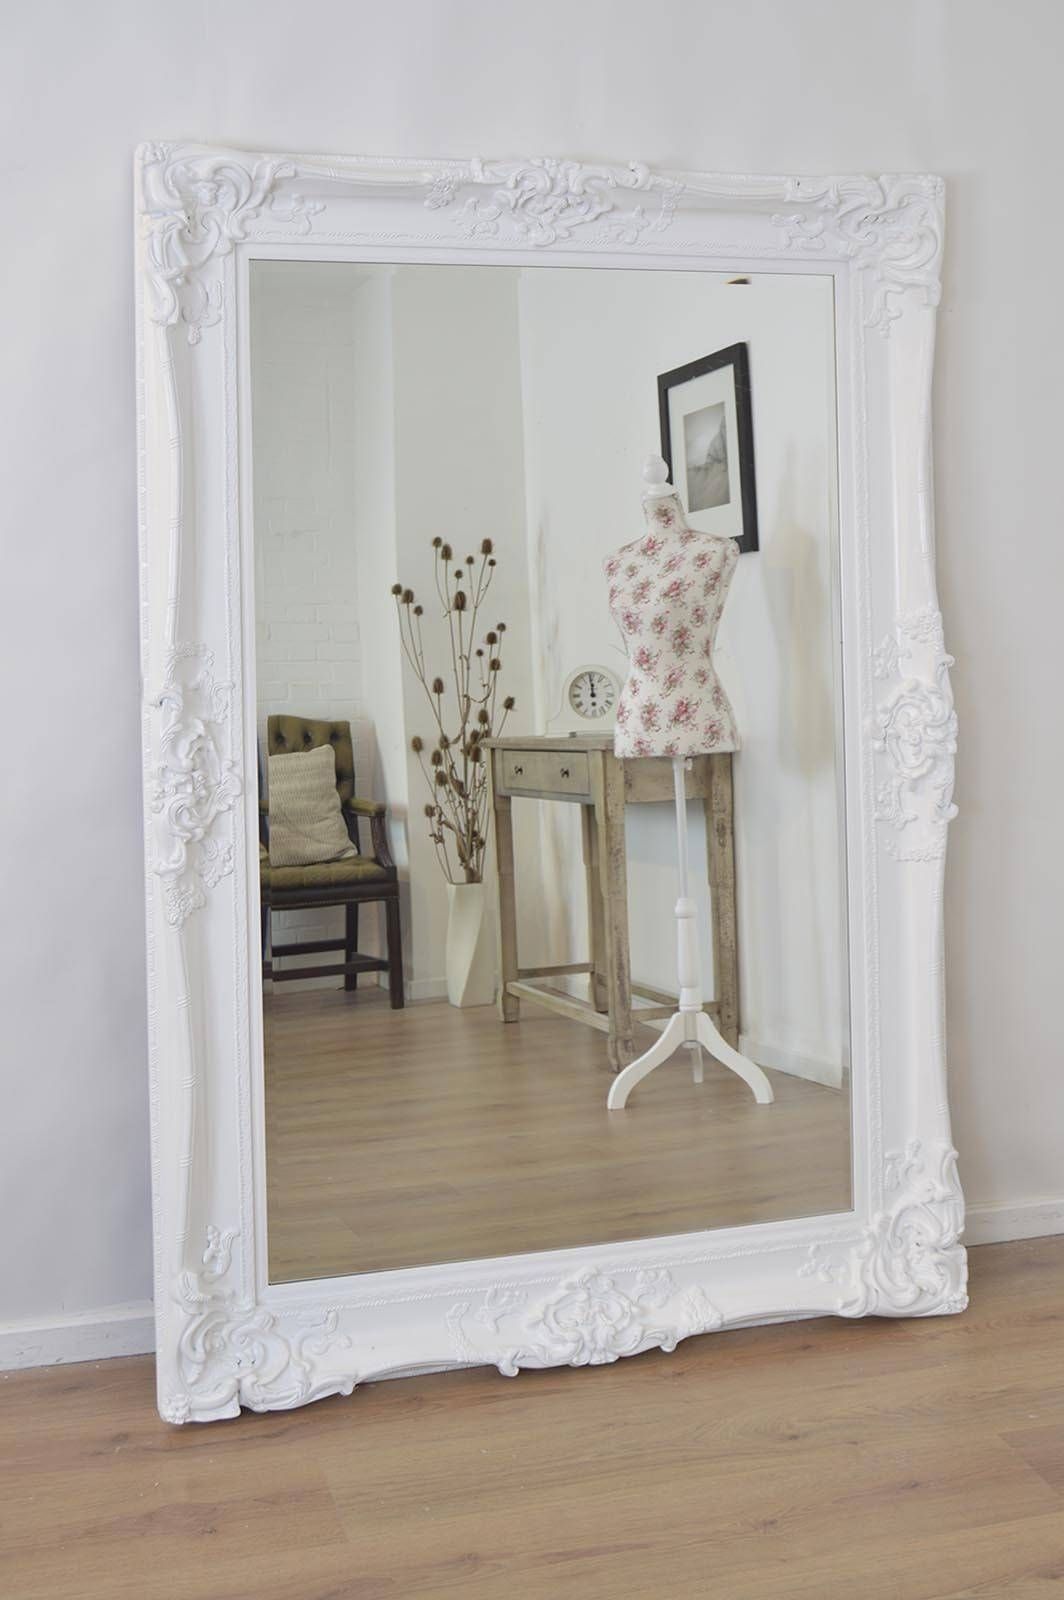 Shabby Chic Mirror Large – White Distressed Shabby Chic Mirror Inside Large White Shabby Chic Mirrors (View 1 of 15)